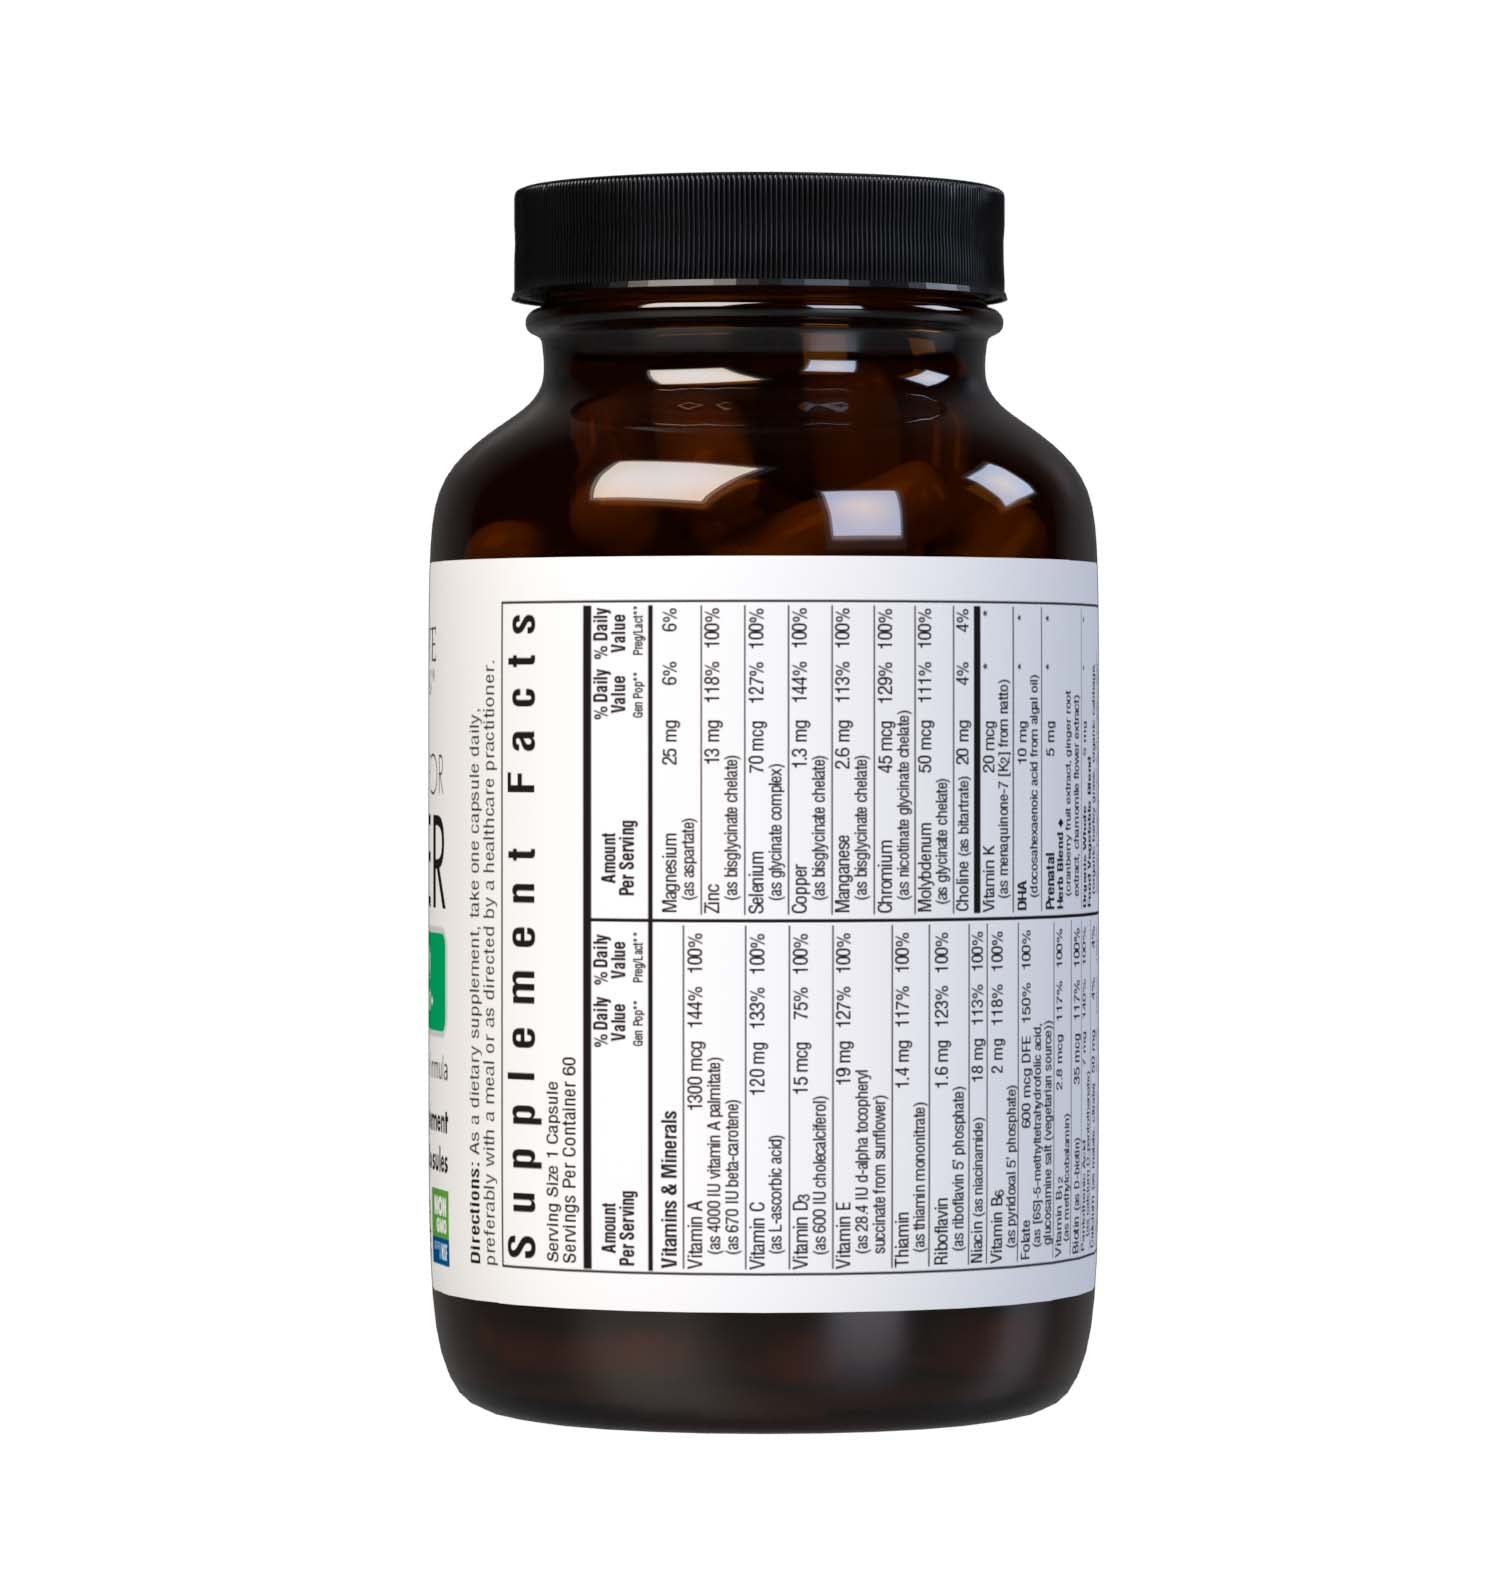 Bluebonnet’s Intimate Essentials Fertility For HER Whole Food-Based Multiple 60 Vegetable Capsules are specially formulated to help support a woman’s optimal reproductive health and wellness with a complementary combination of vitamins, minerals and botanicals. Supplement facts panel. #size_60 count